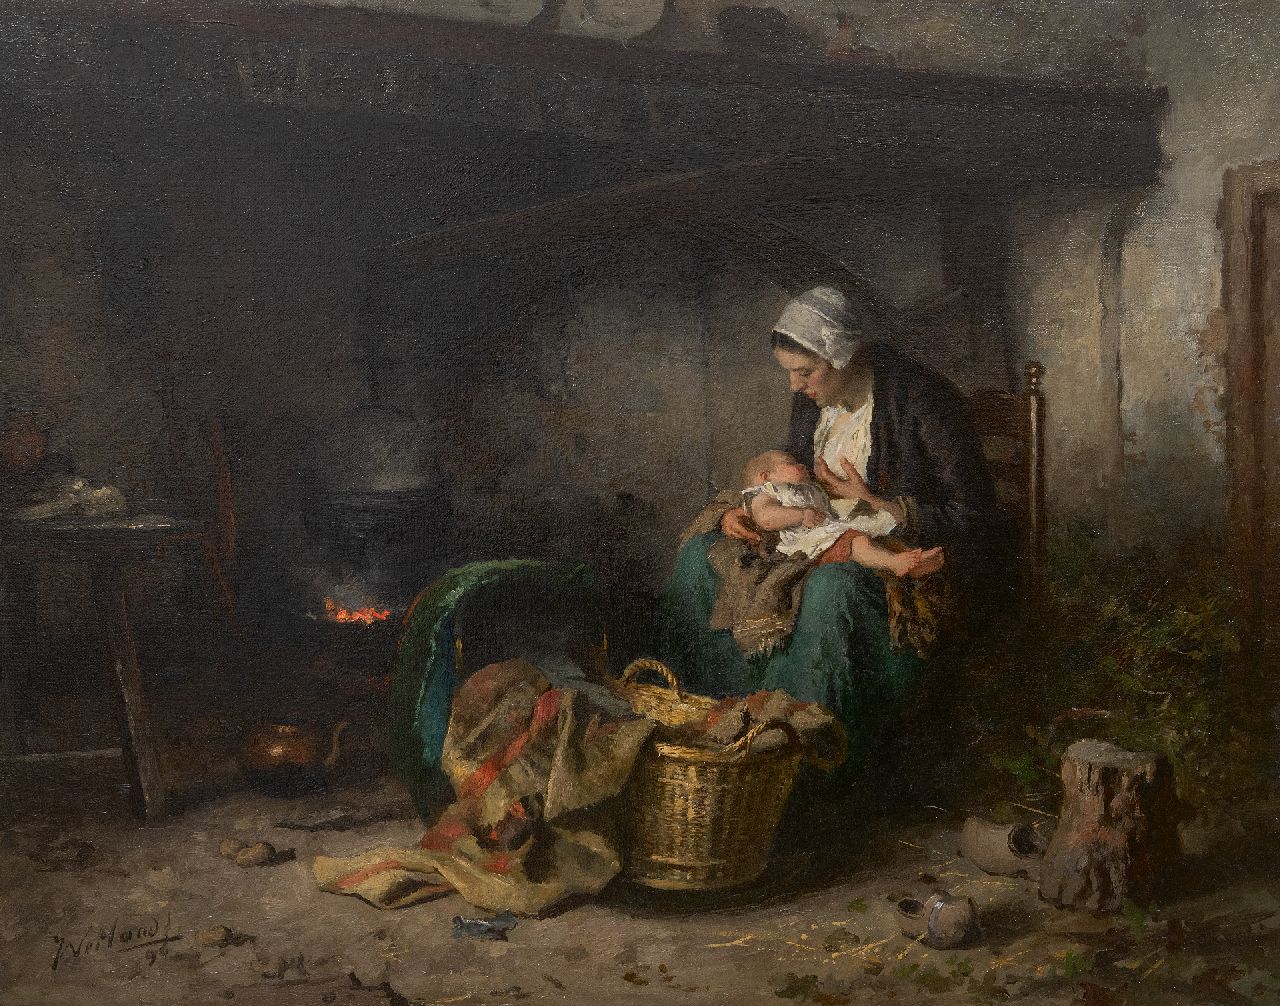 Weiland J.  | Johannes Weiland | Paintings offered for sale | Farmhouse interior with mother and child, oil on canvas 65.3 x 81.2 cm, signed l.l. and dated '96